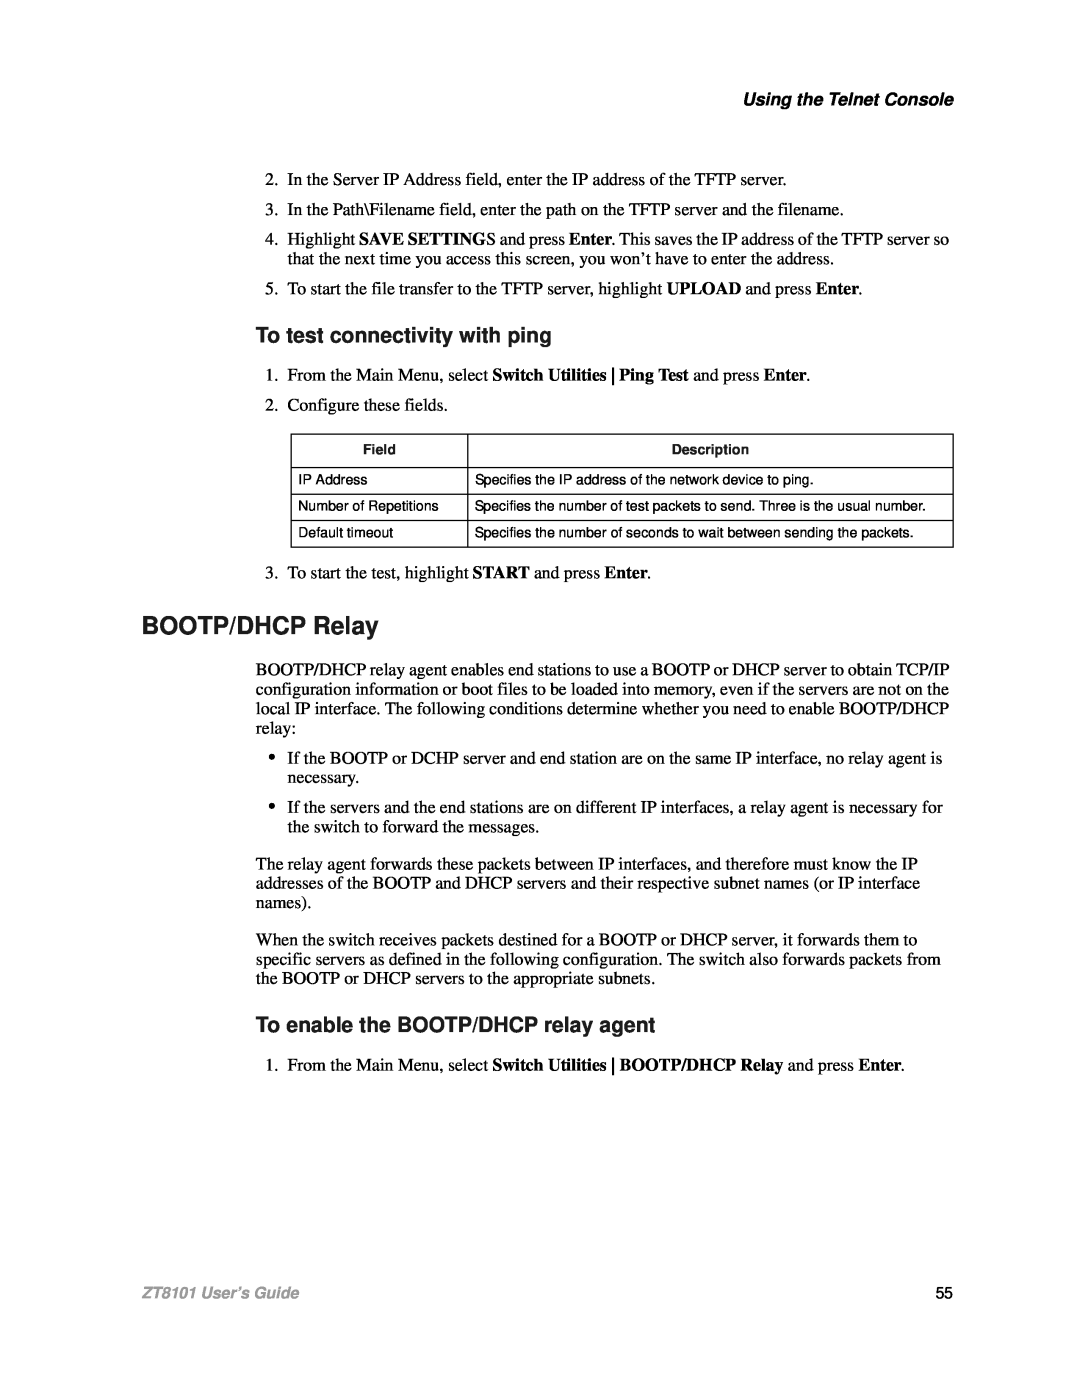 Intel ZT8101 user manual BOOTP/DHCP Relay, To test connectivity with ping, To enable the BOOTP/DHCP relay agent 